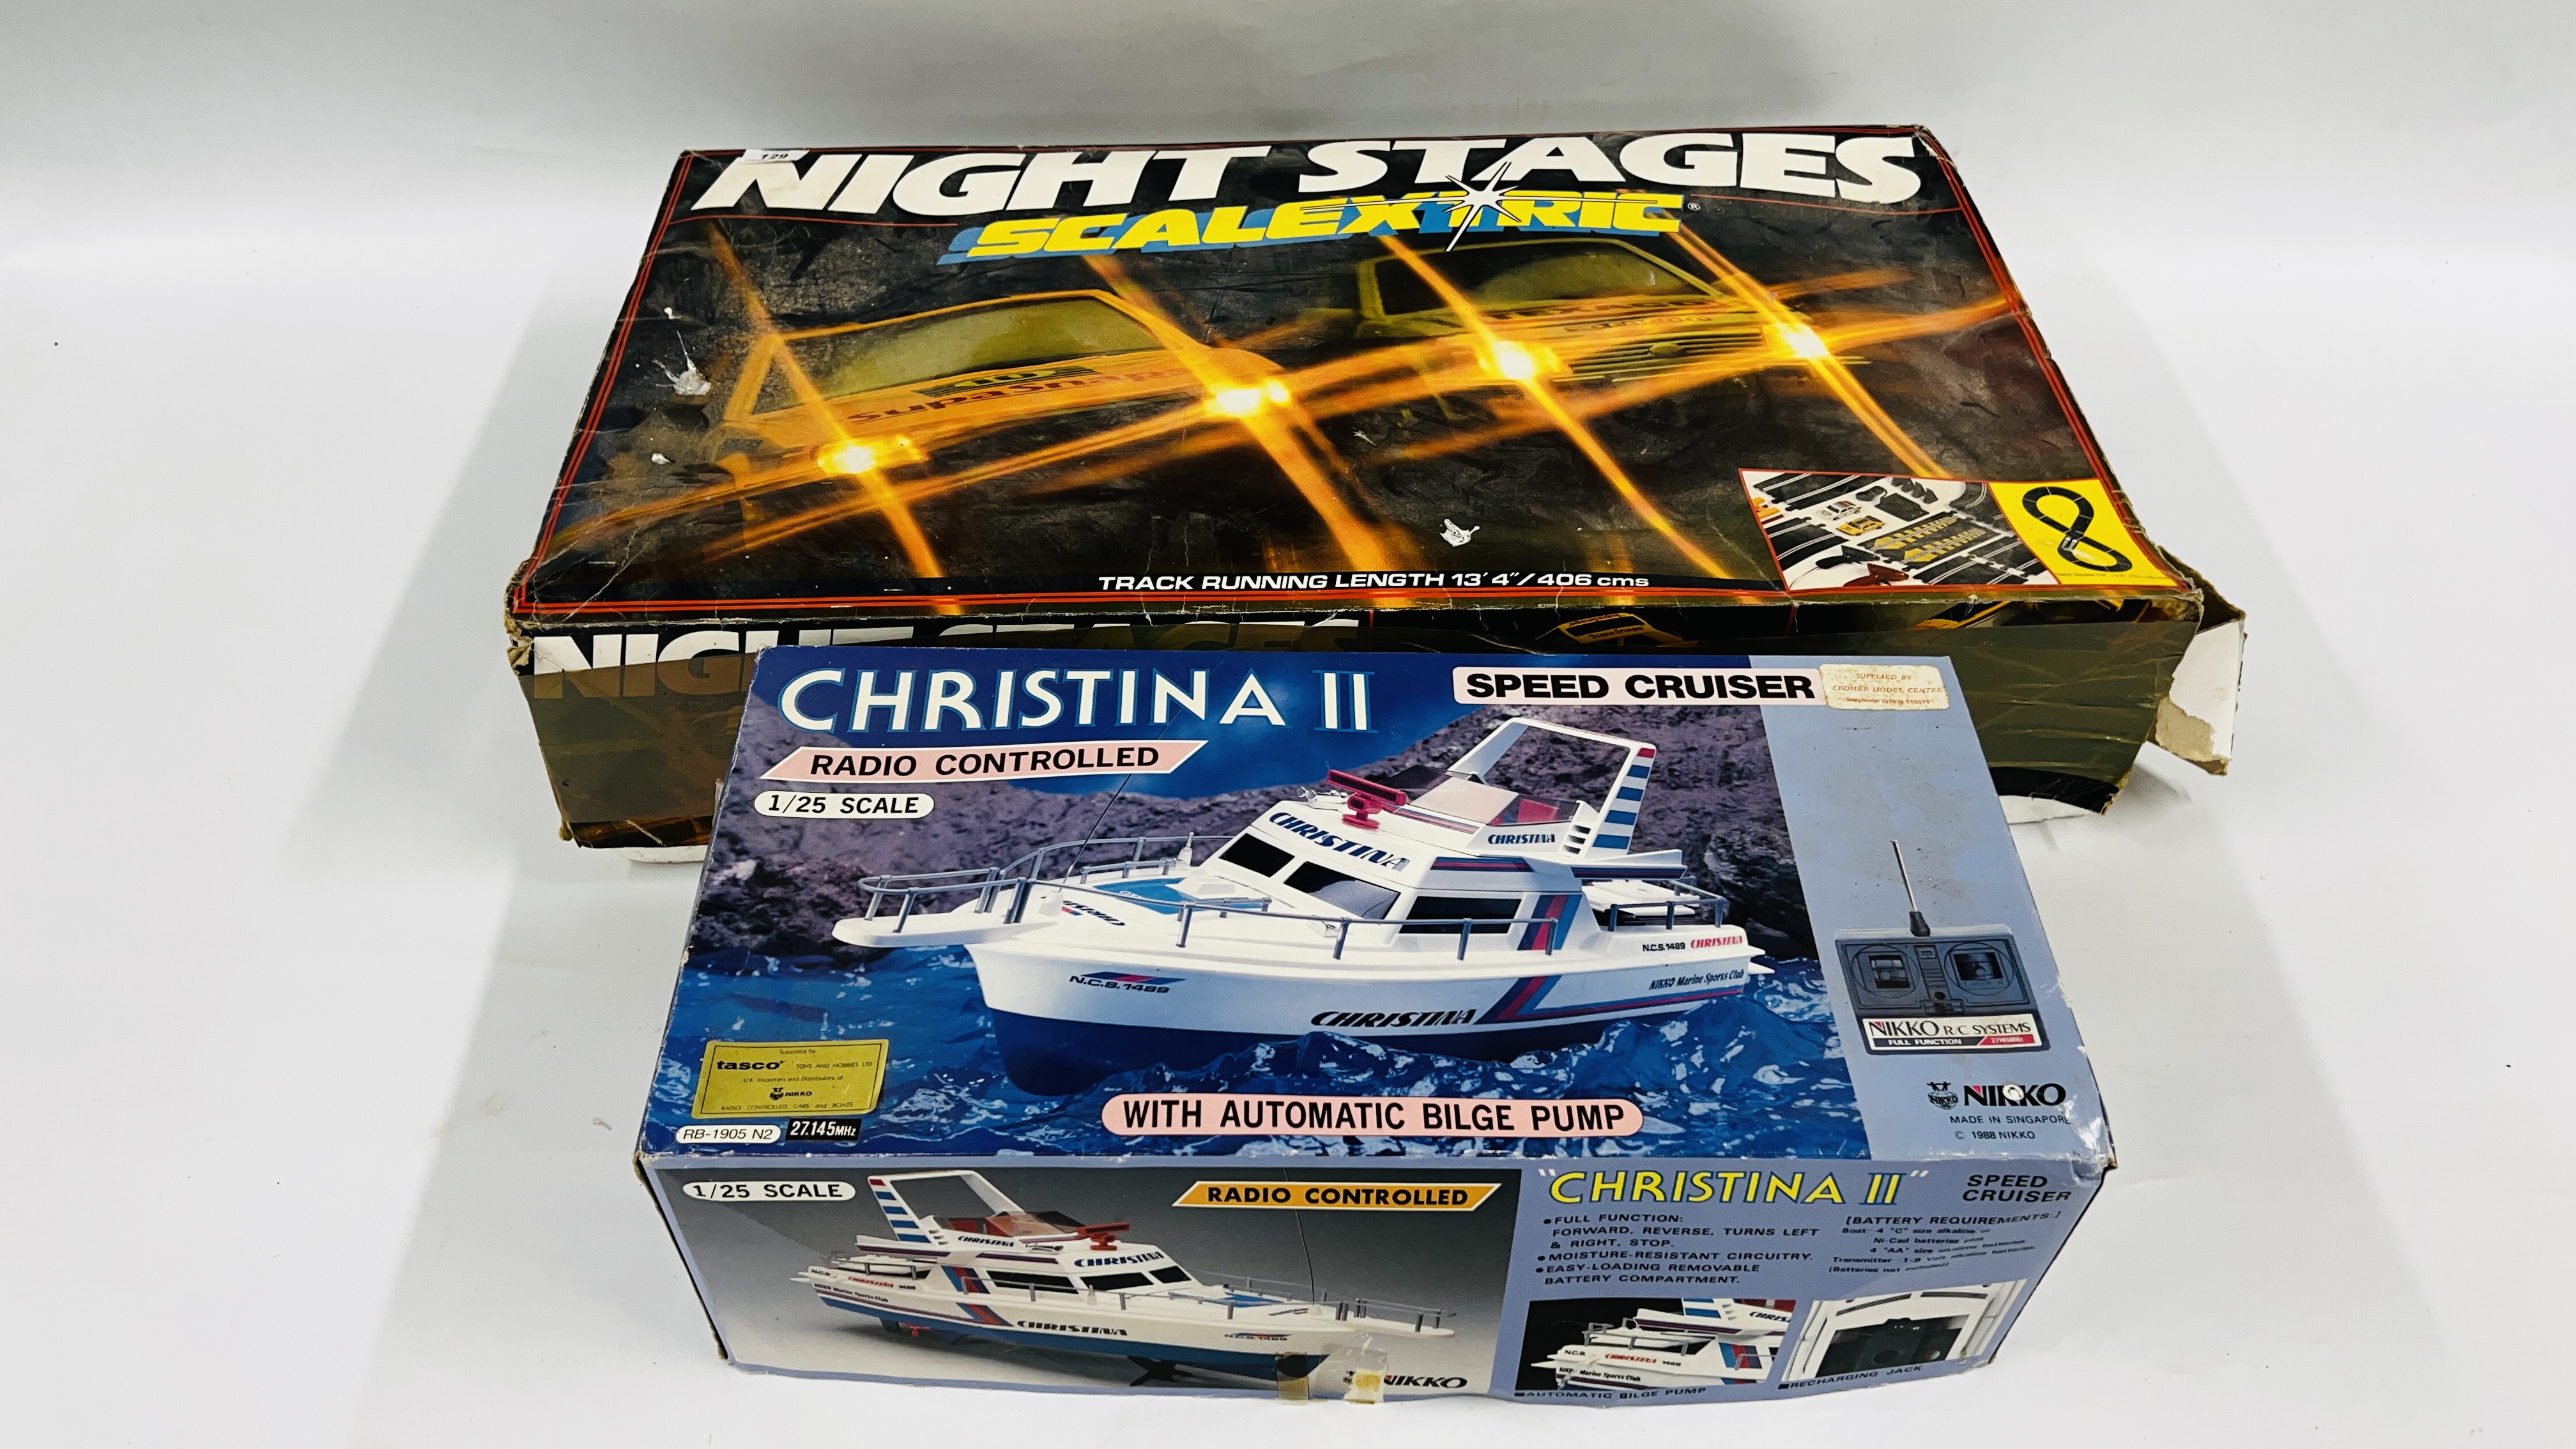 SCALEXTRIC "NIGHT STAGES" RACING GAME A/F ALONG WITH CHRISTINA II RADIO CONTROL BOAT BOTH SOLD AS